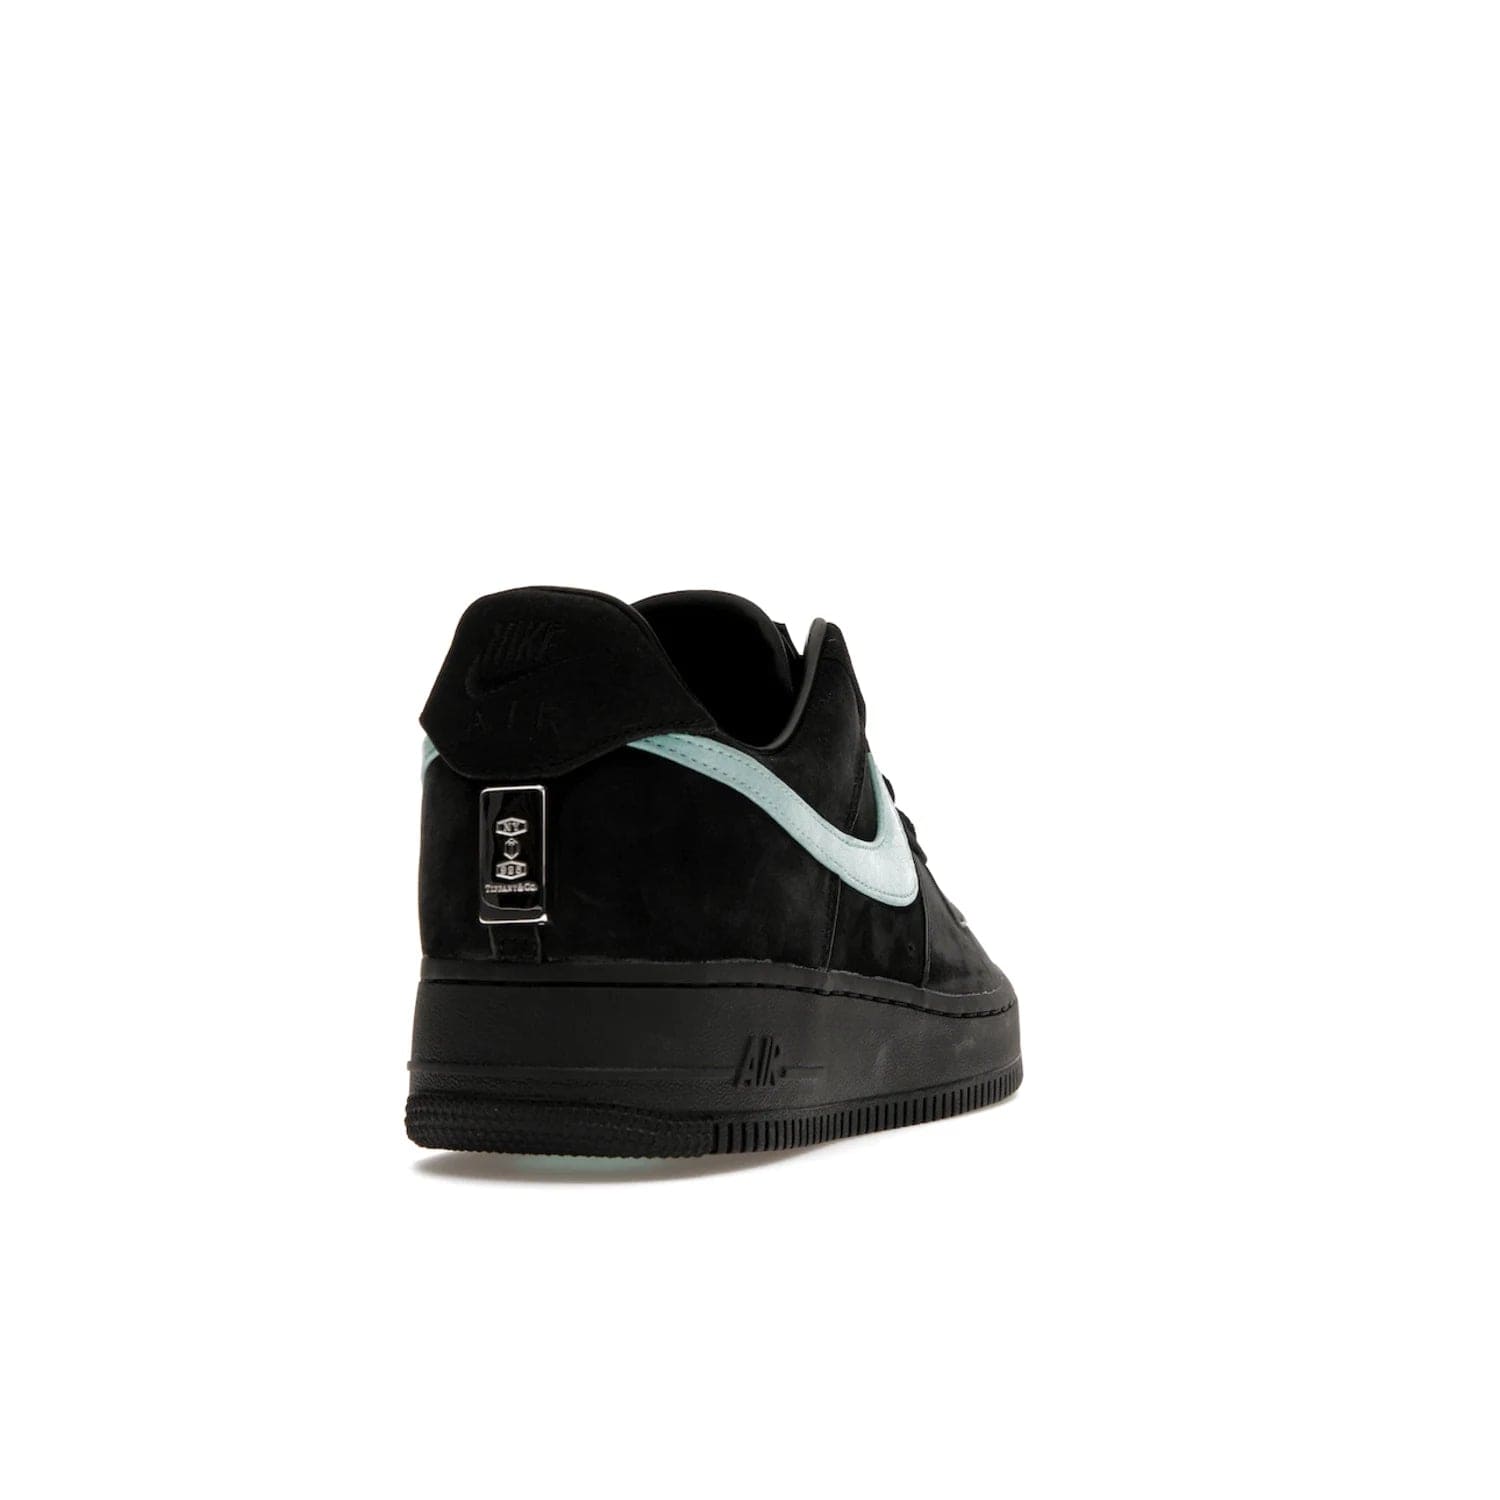 Nike Air Force 1 Low Tiffany & Co. 1837 - Image 30 - Only at www.BallersClubKickz.com - Nike & Tiffany & Co. collaborate on an exclusive sterling silver sneaker, the Air Force 1 Low Tiffany & Co. 1837. Featuring a suede uppr, Tiffany Blue Swoosh and "Tiffany" cursive branding, this pair of AF1s offers an opulent fusion of athleisure and luxury fashion. Release date March 2023.